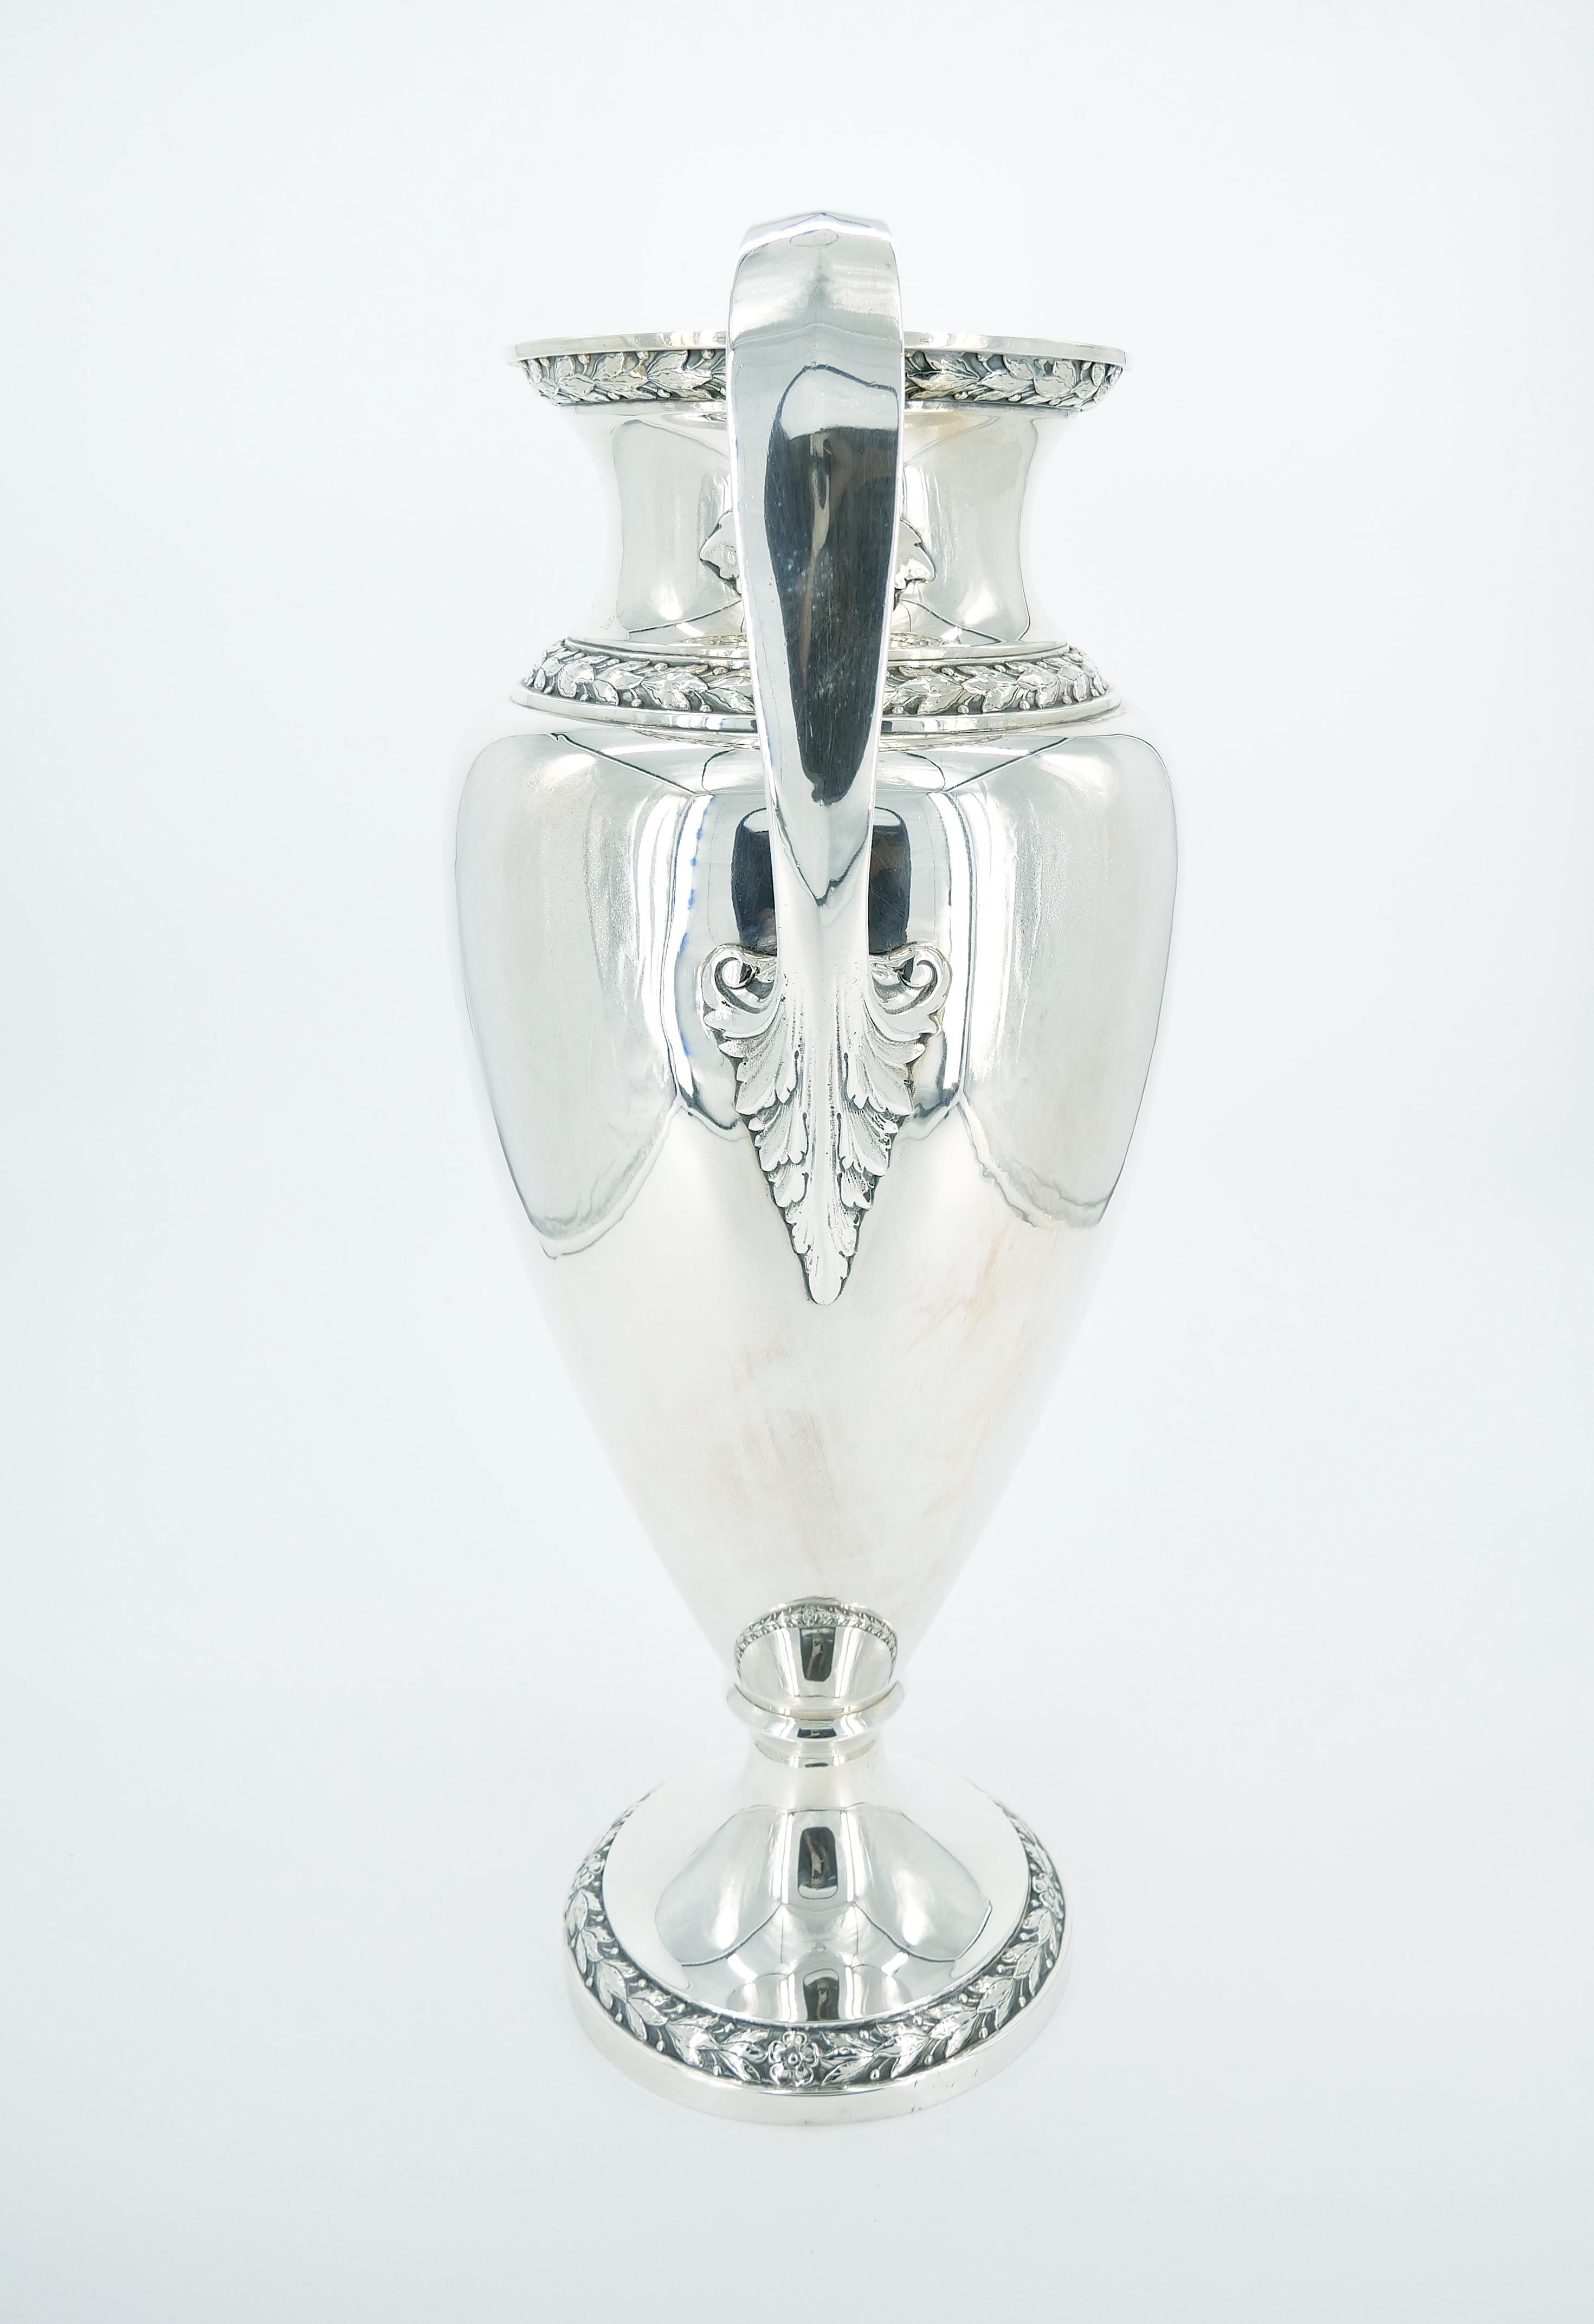 Discover a truly extraordinary piece of history with this Very Tall early 19th Century English Sterling Silver Decorative Centerpiece Vase. Standing at an impressive 21 1/2 inches tall with a diameter of 11 1/2 inches, this commanding piece is a